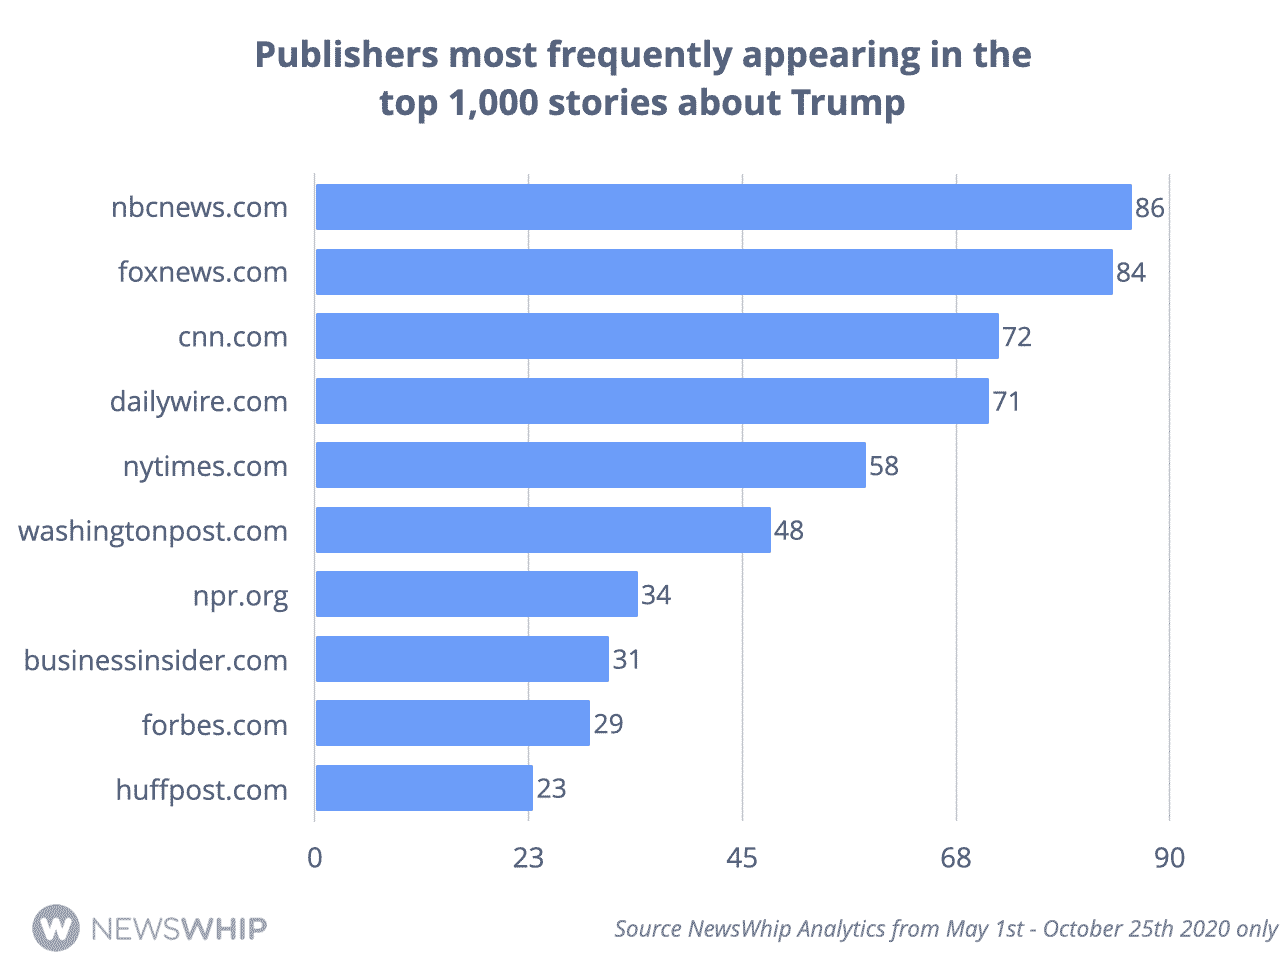 Histogram showing the number of times publishers appeared in the 1,000 most engaged stories about Trump